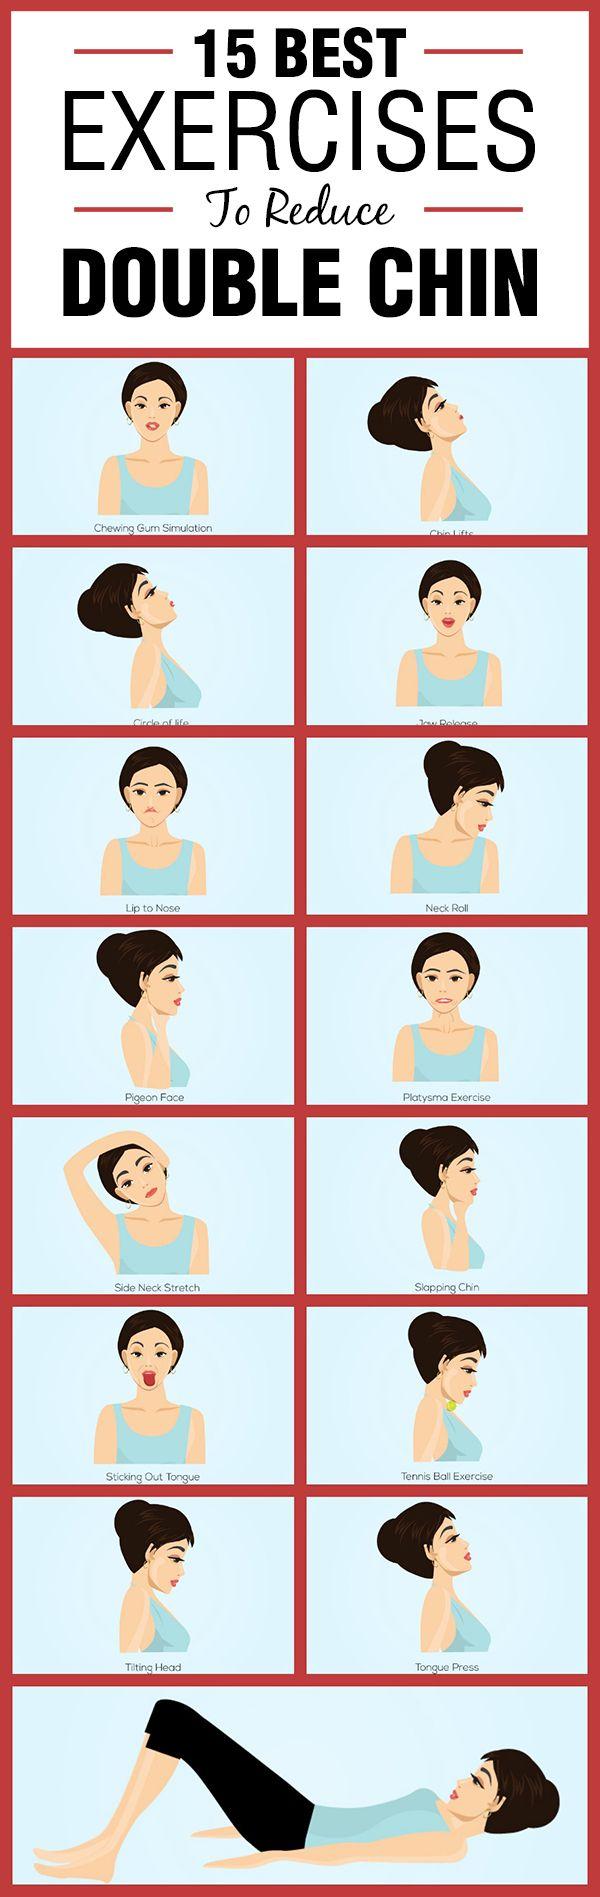 Hochzeit - 15 Best Exercises To Reduce Double Chin